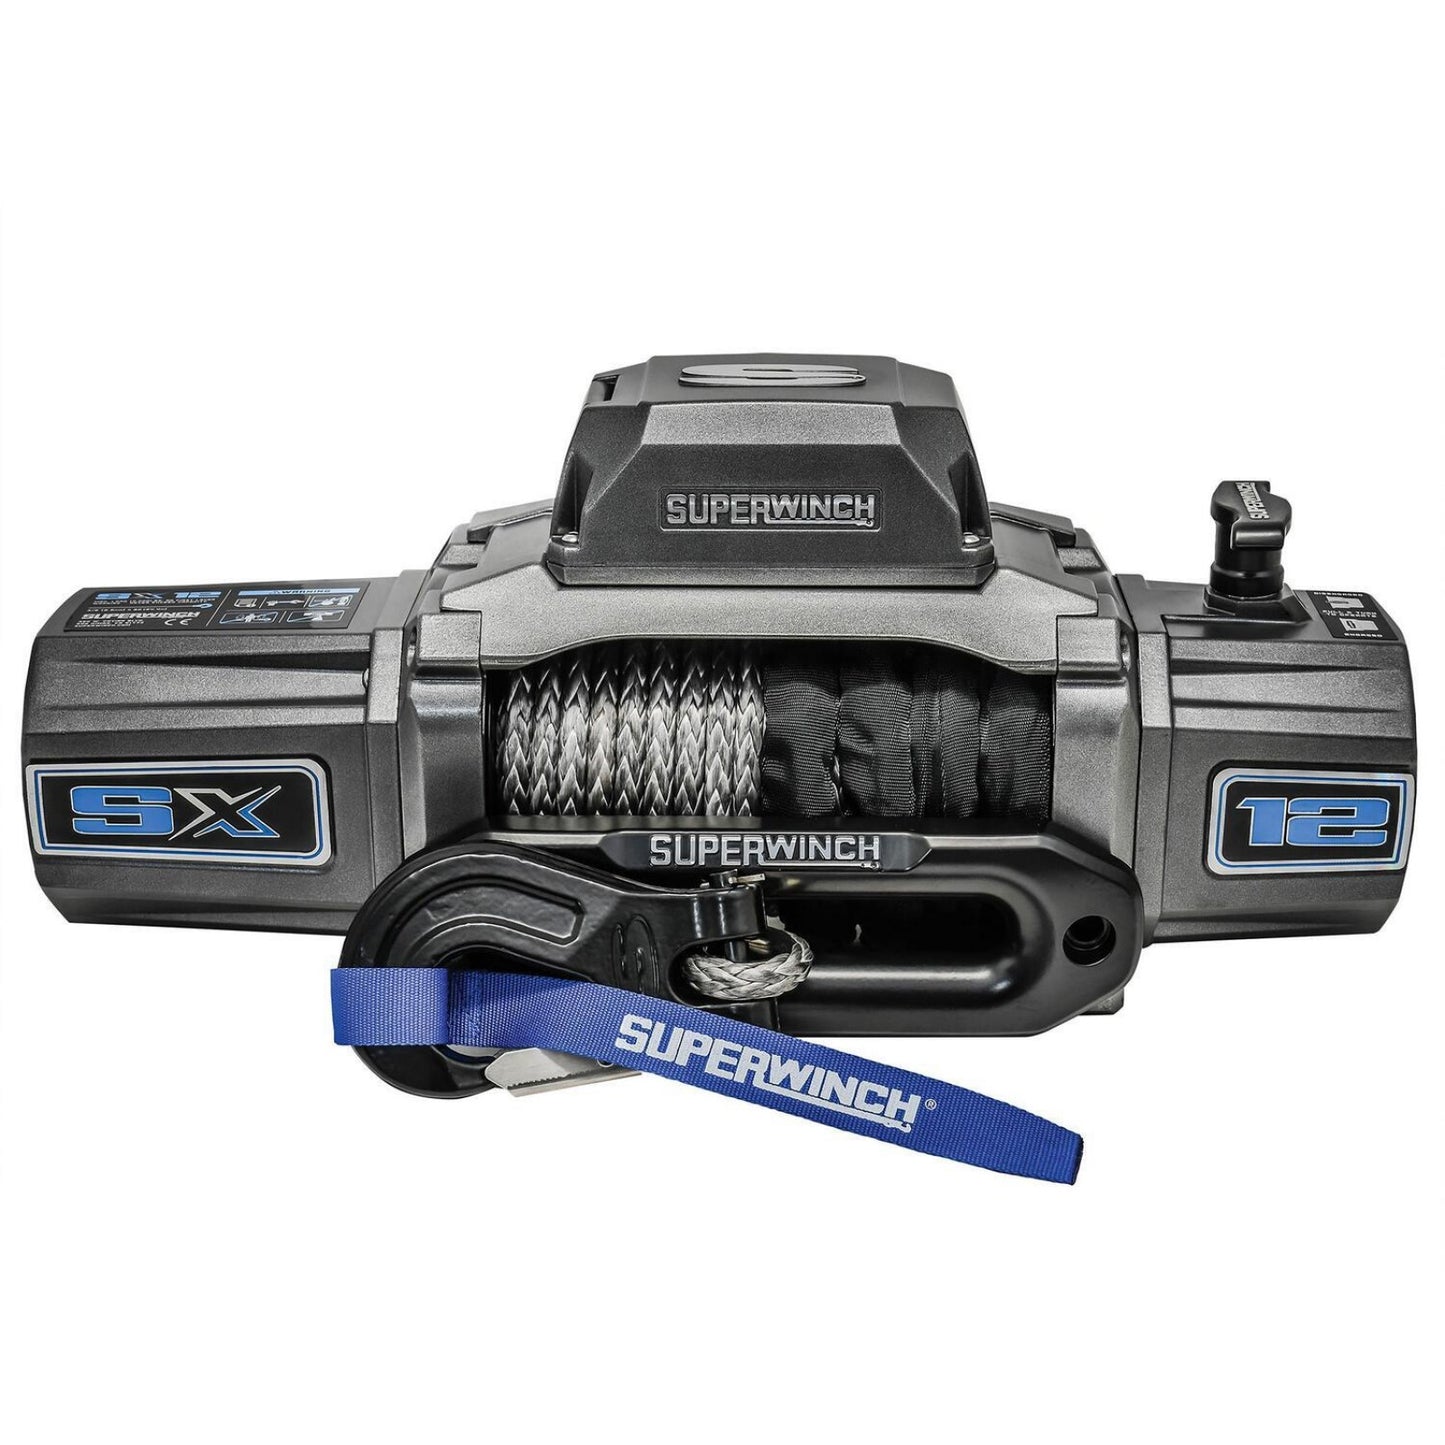 Superwinch SX12SR 12V Synthetic Rope Winch